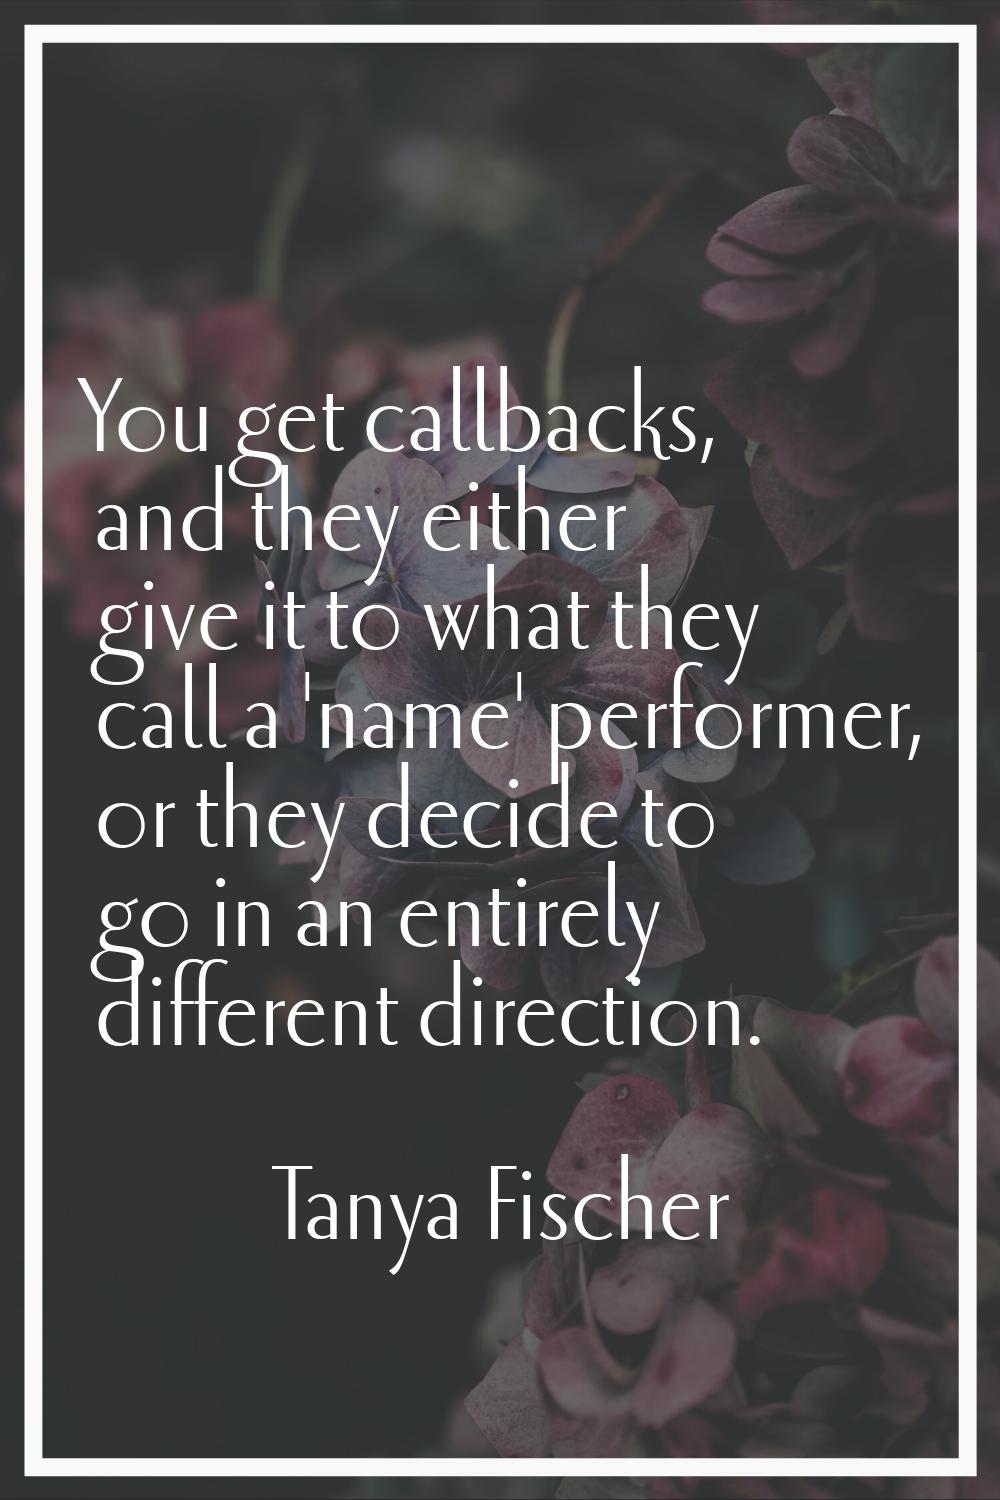 You get callbacks, and they either give it to what they call a 'name' performer, or they decide to 